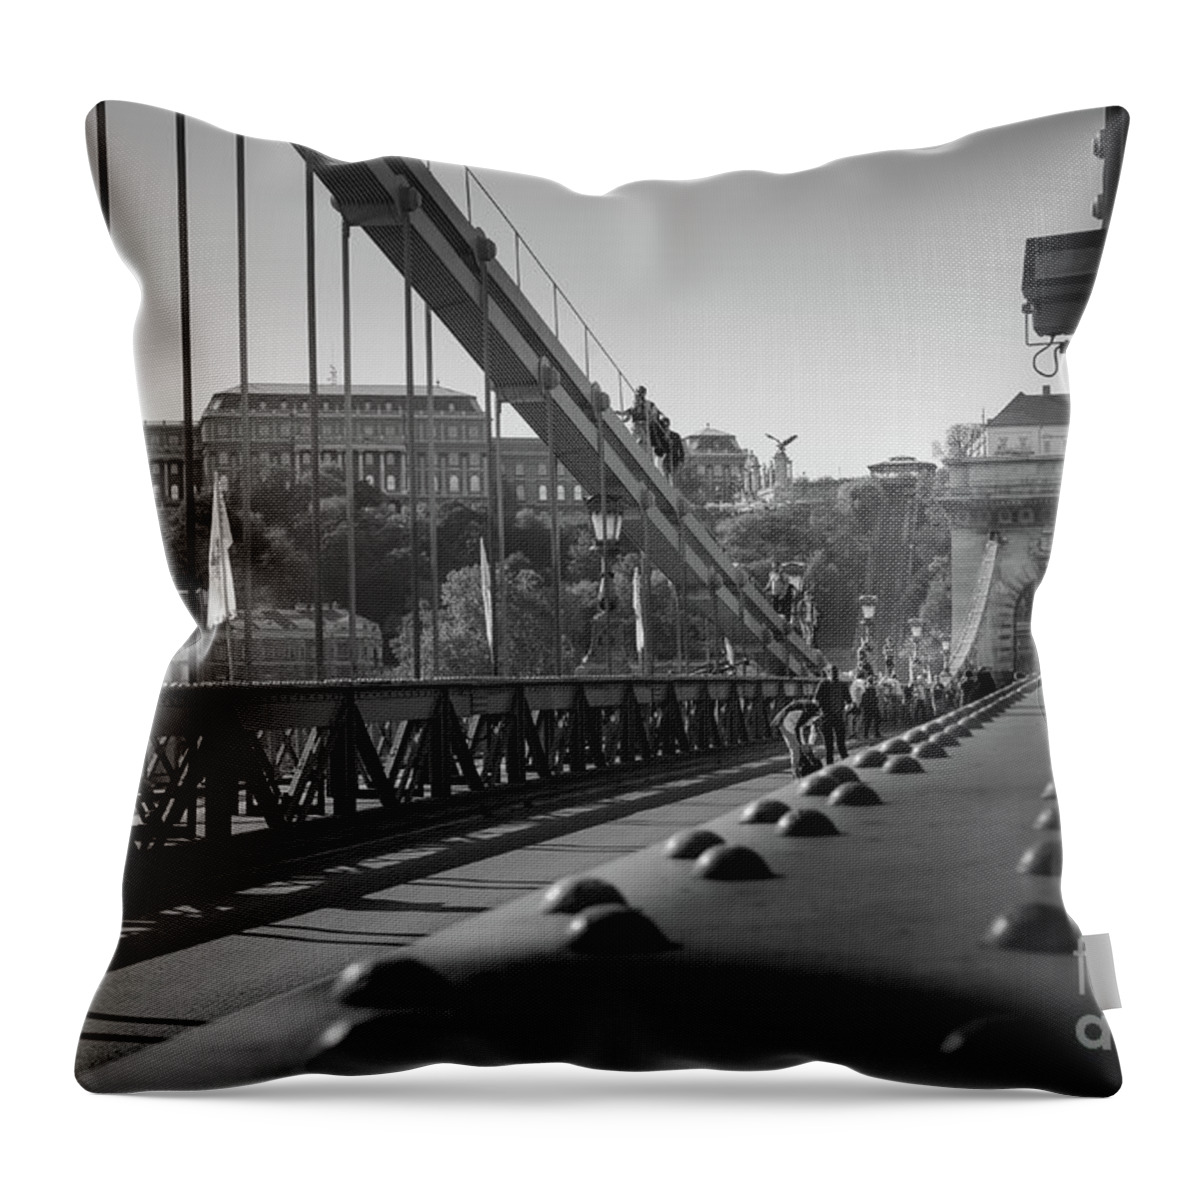 Chain Throw Pillow featuring the photograph The Chain Bridge, Danube Budapest by Perry Rodriguez